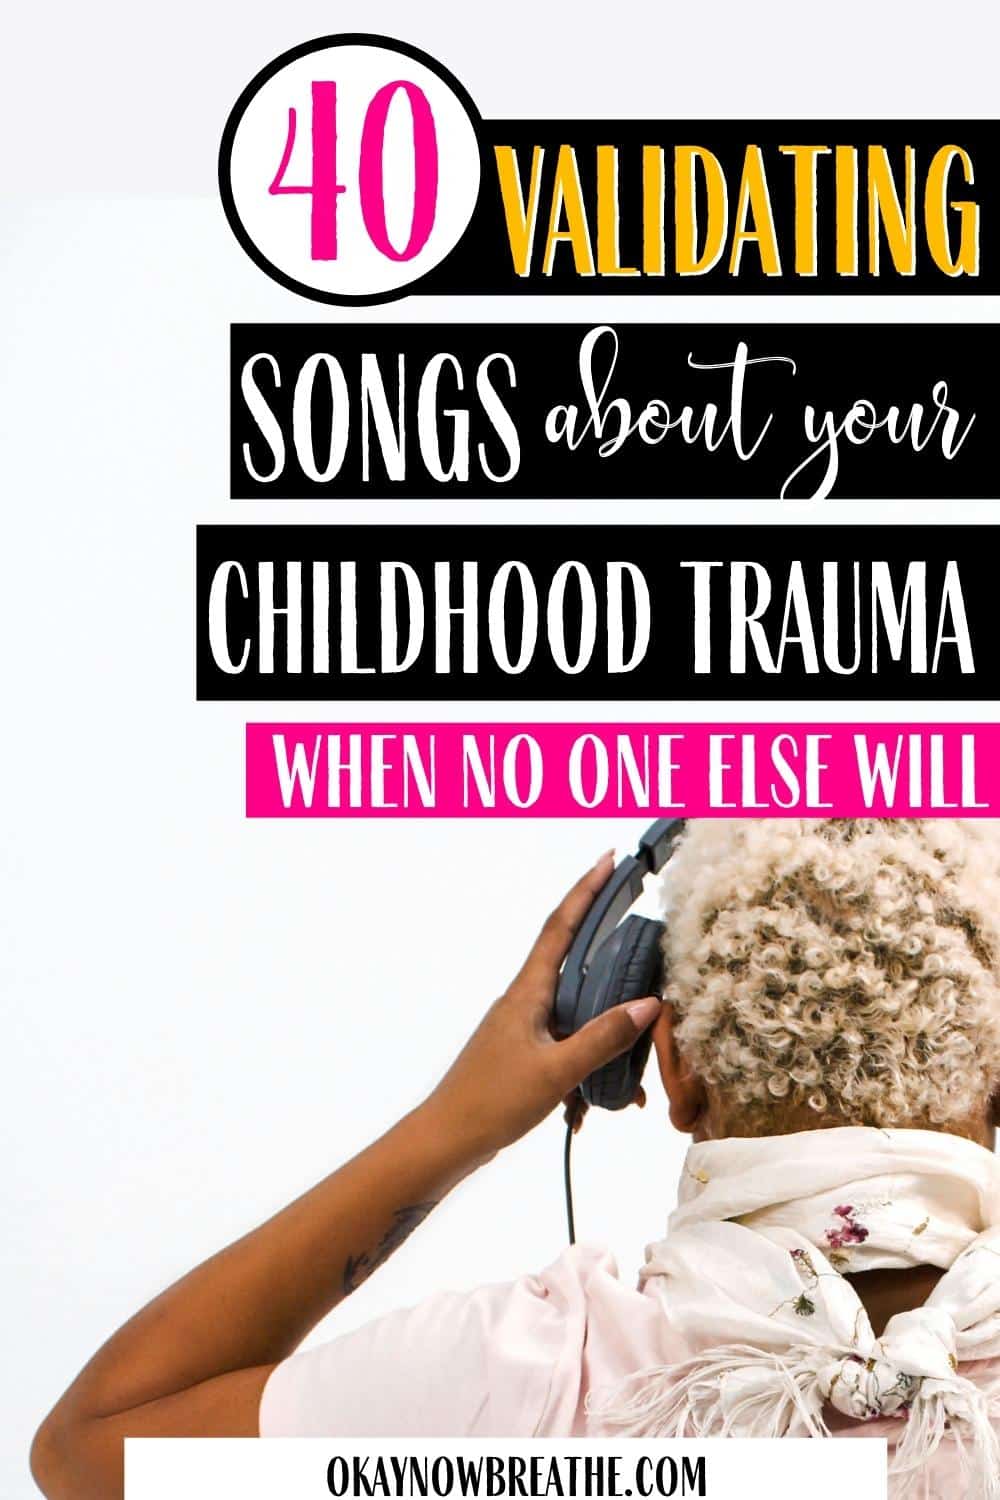 A Black female with bleach blonde curly short hair placing headphones over her ears. Her back is towards the camera. Text overlay says, "40 validating songs about your childhood trauma when no one else will - okaynowbreathe.com